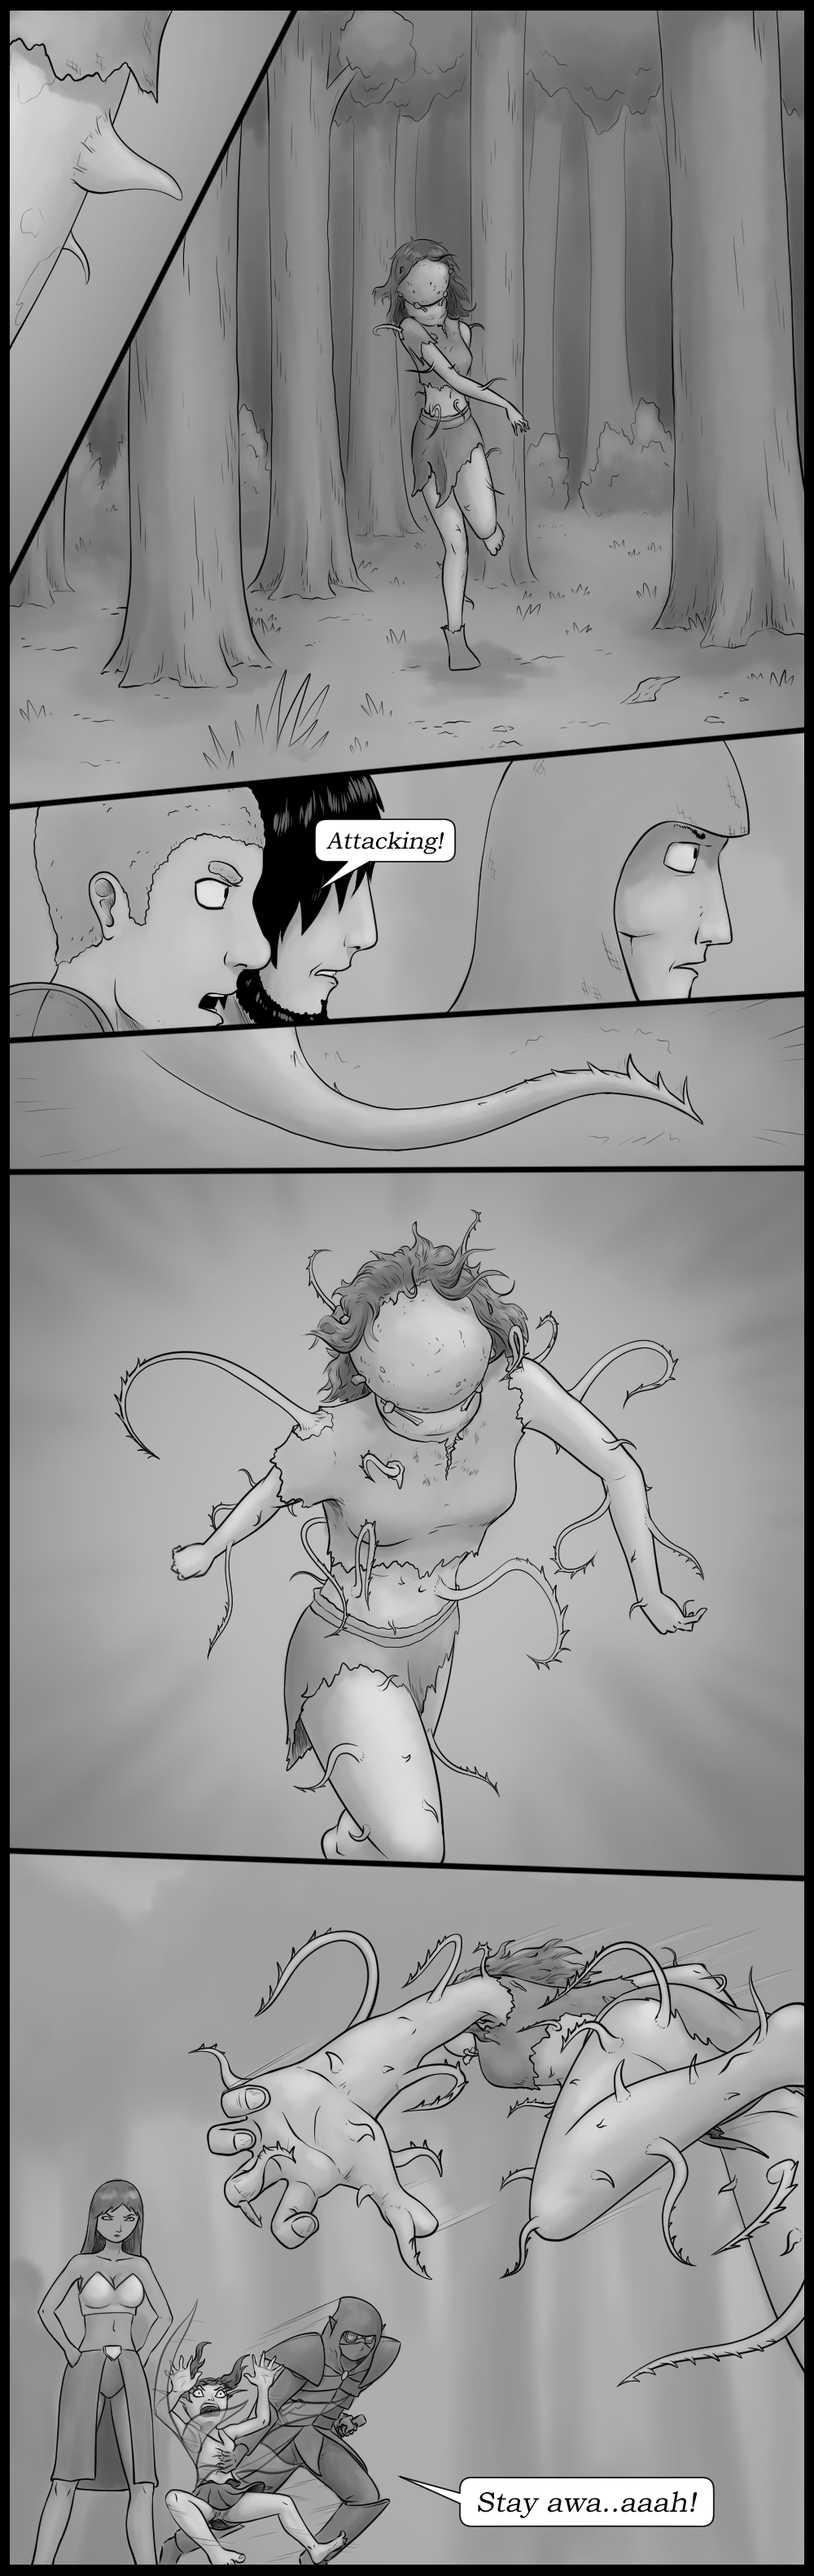 Page 30 - The creature attacks (Part 1)